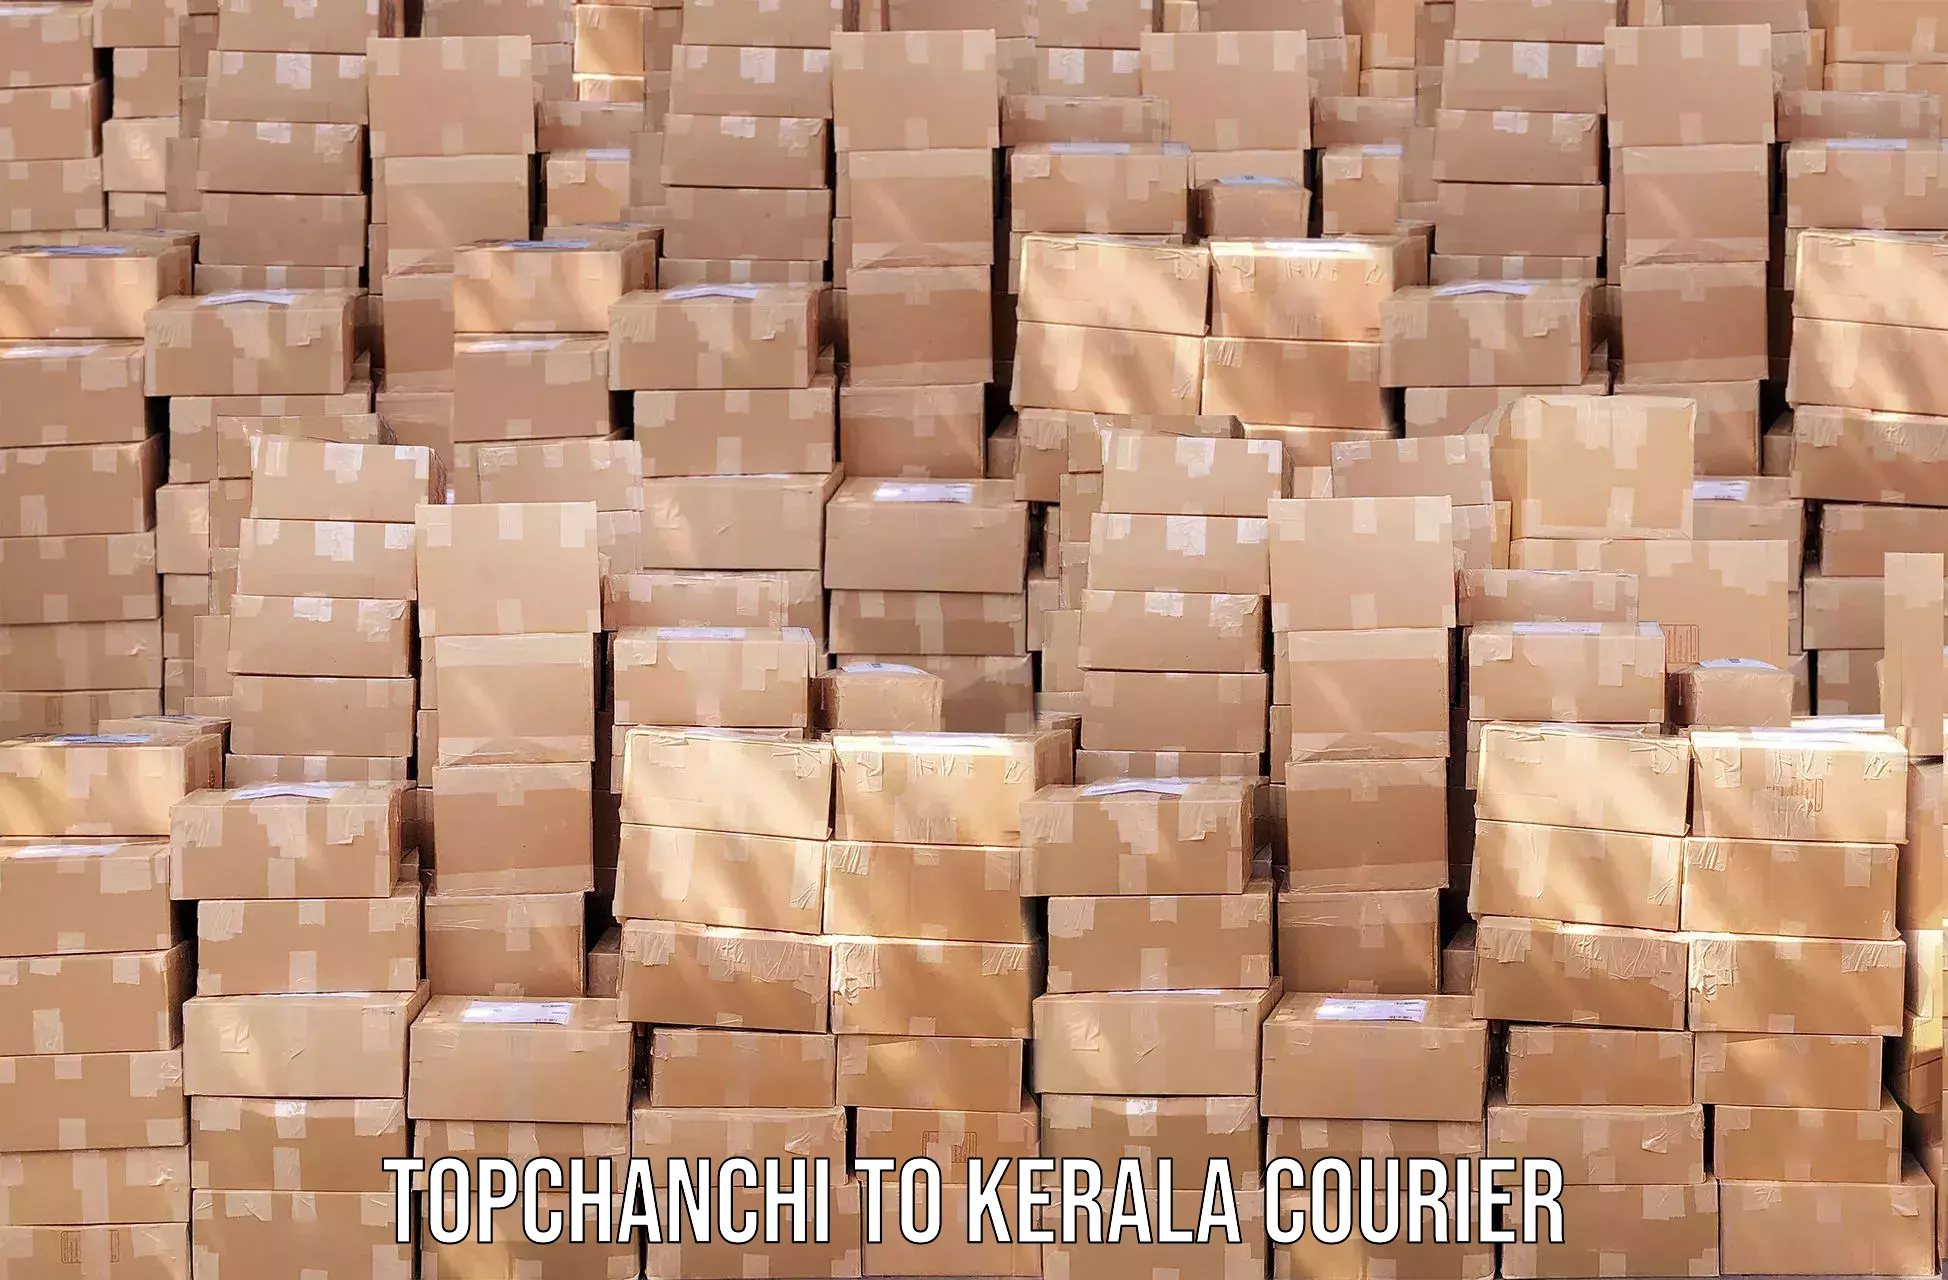 Express delivery solutions Topchanchi to Kerala